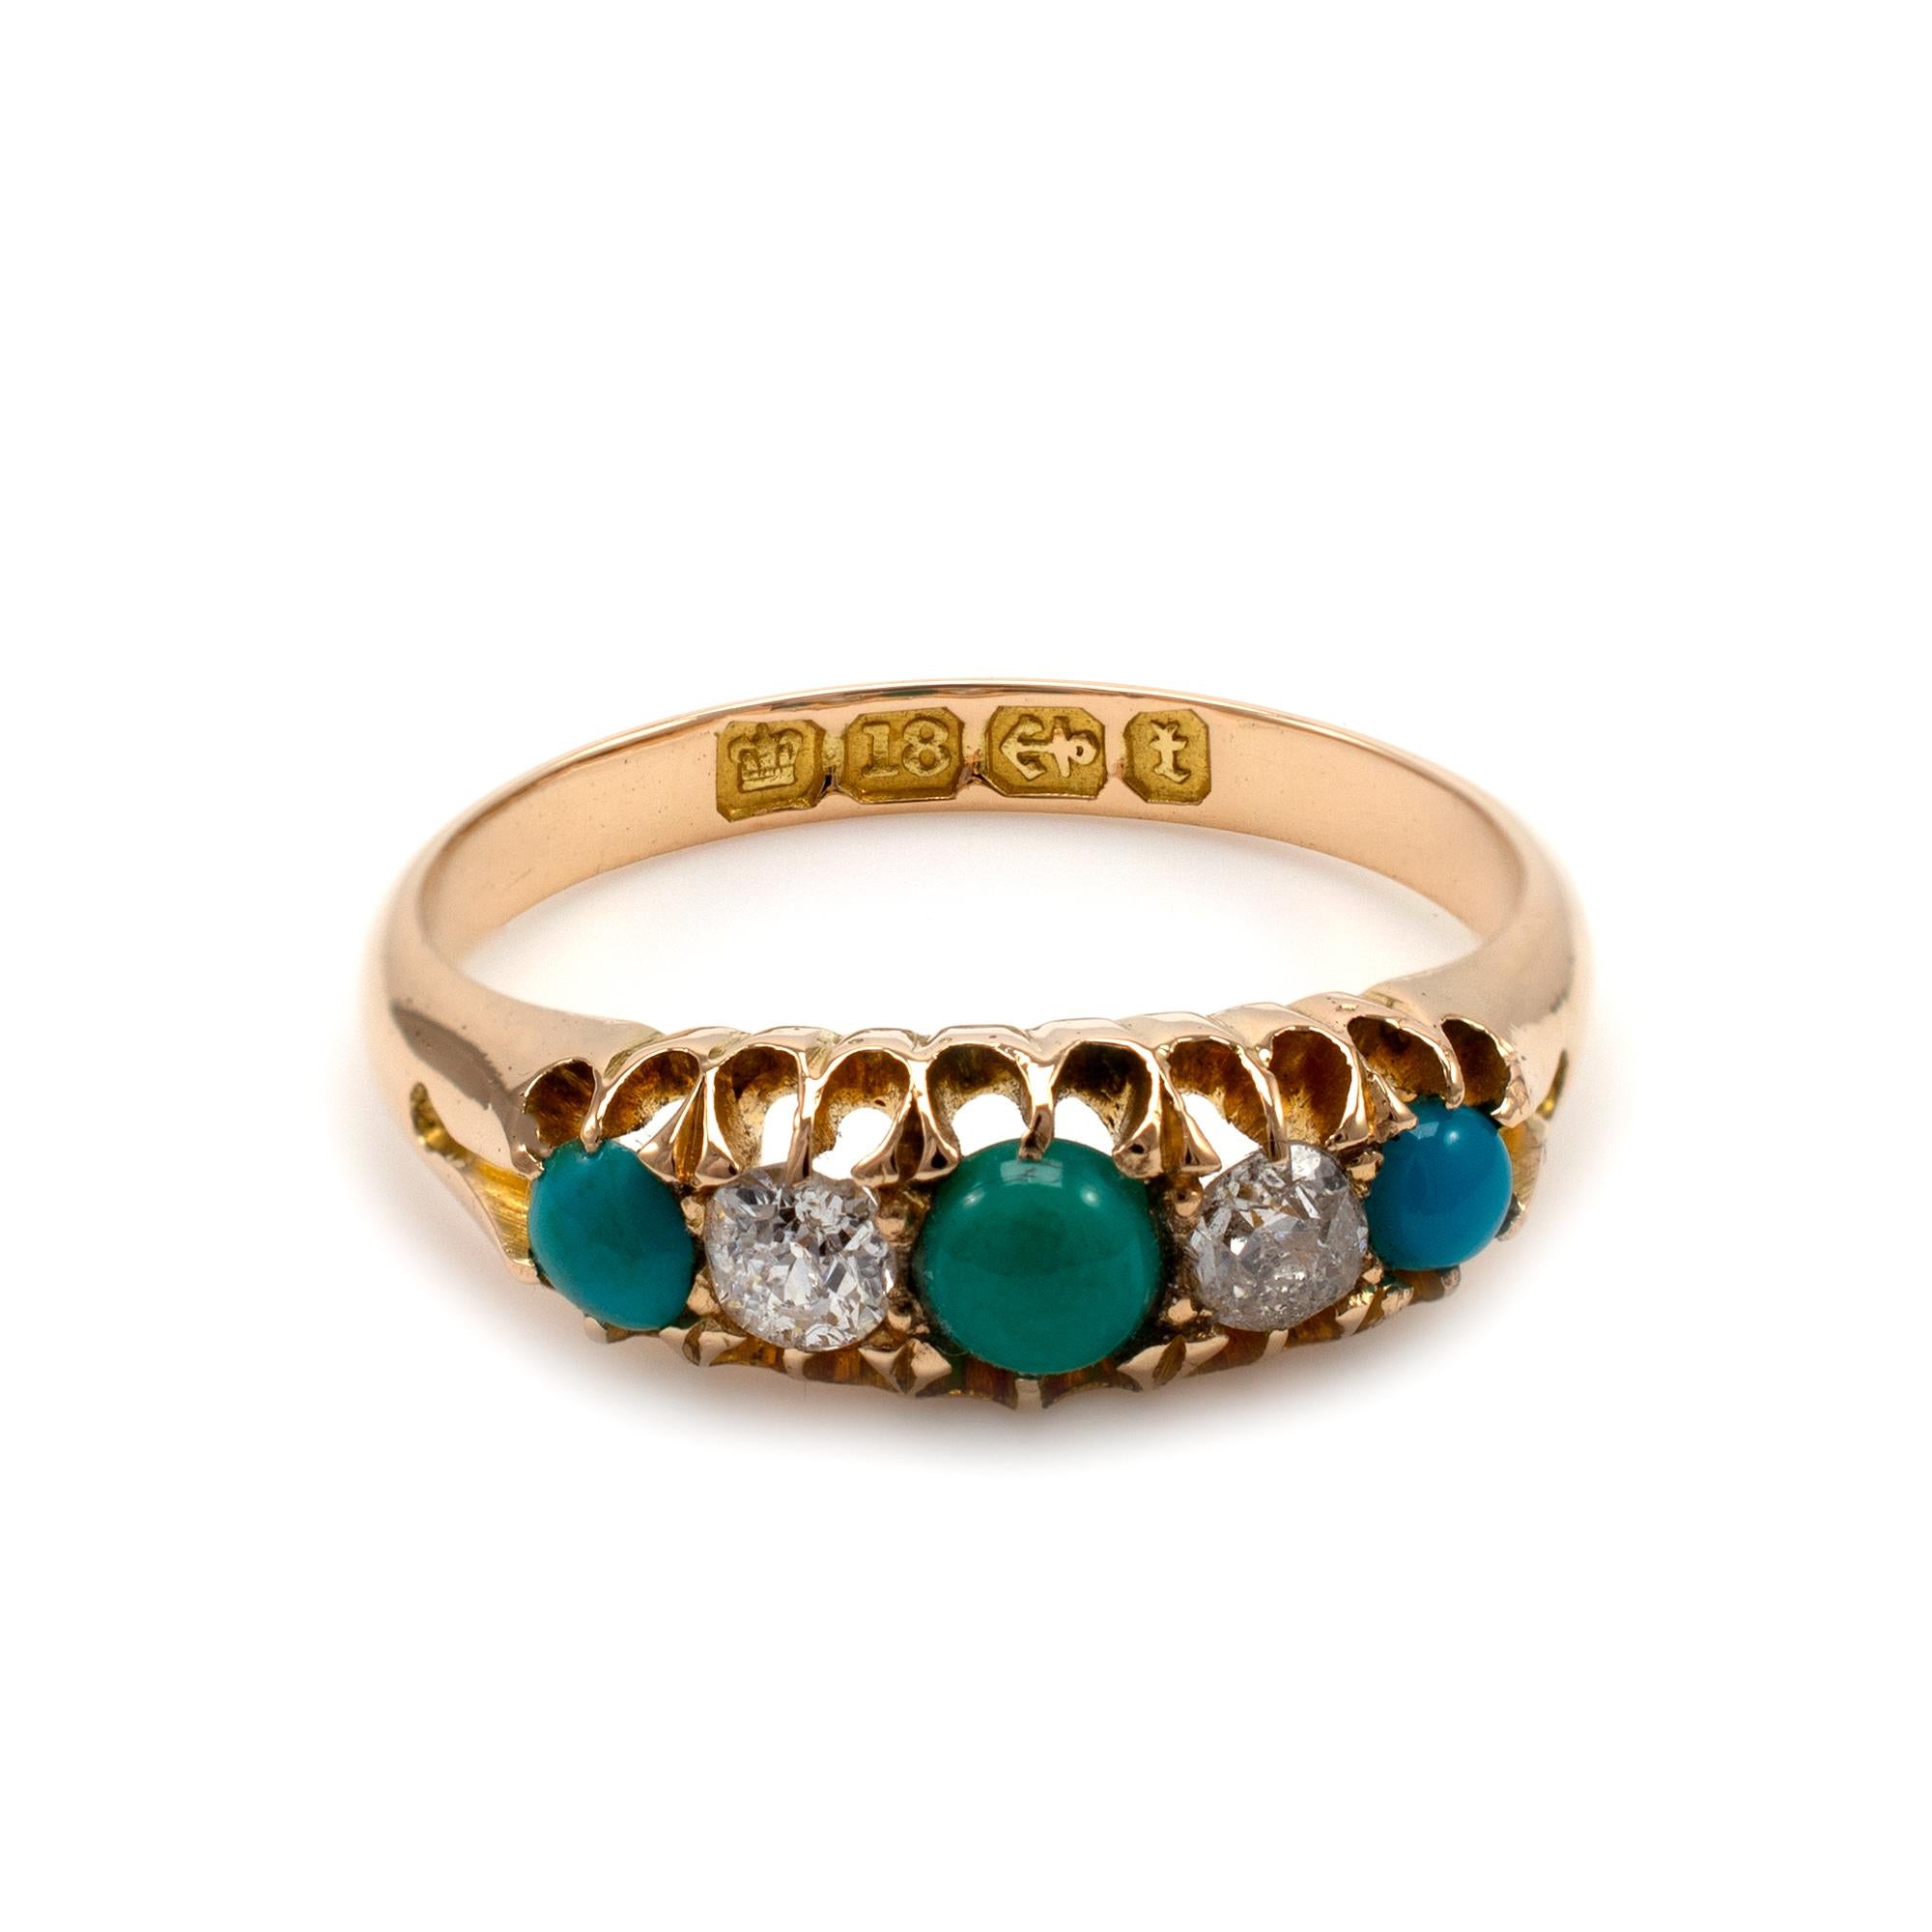 Old European Cut Antique Turquoise and Diamond Boat Shape Ring 18 Karat Yellow Gold, Dated 1893